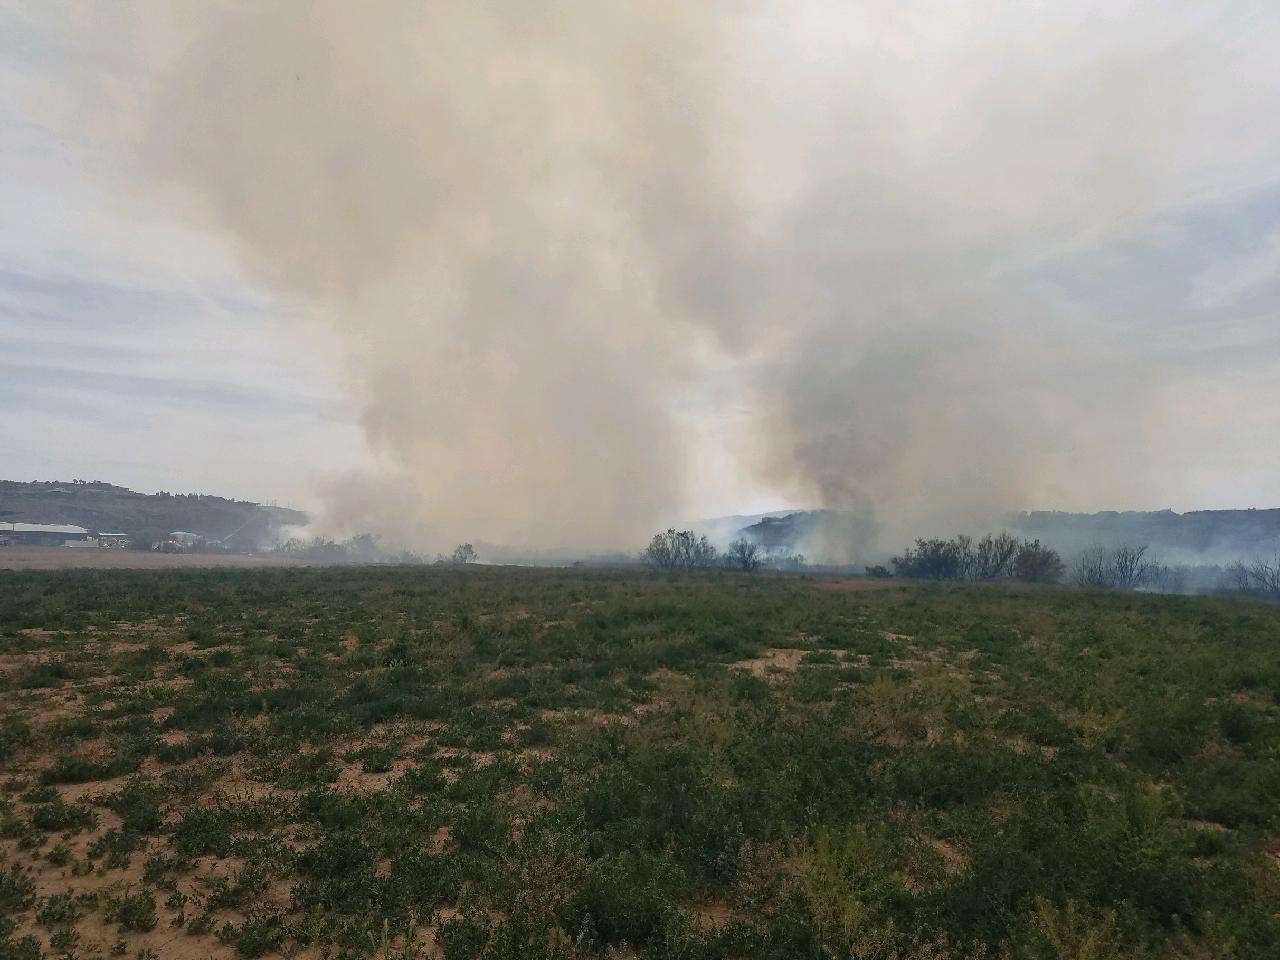 Image of wildfire in Washington County that burned a total of 40 acres.